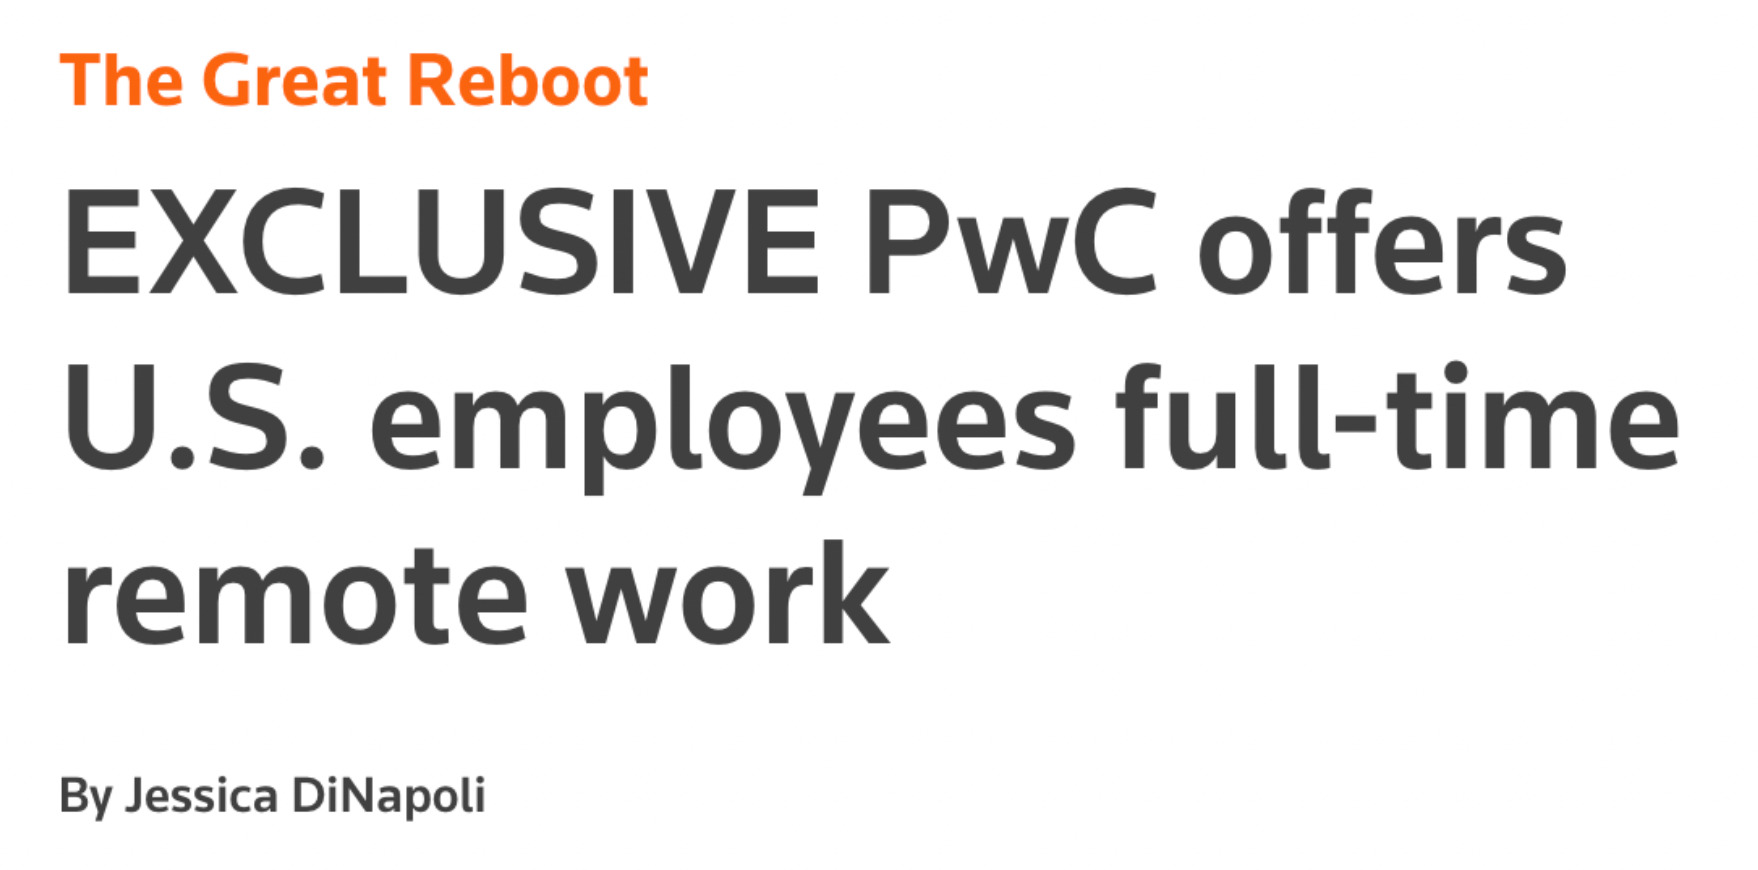 The Great Reboot PwC Remote Work